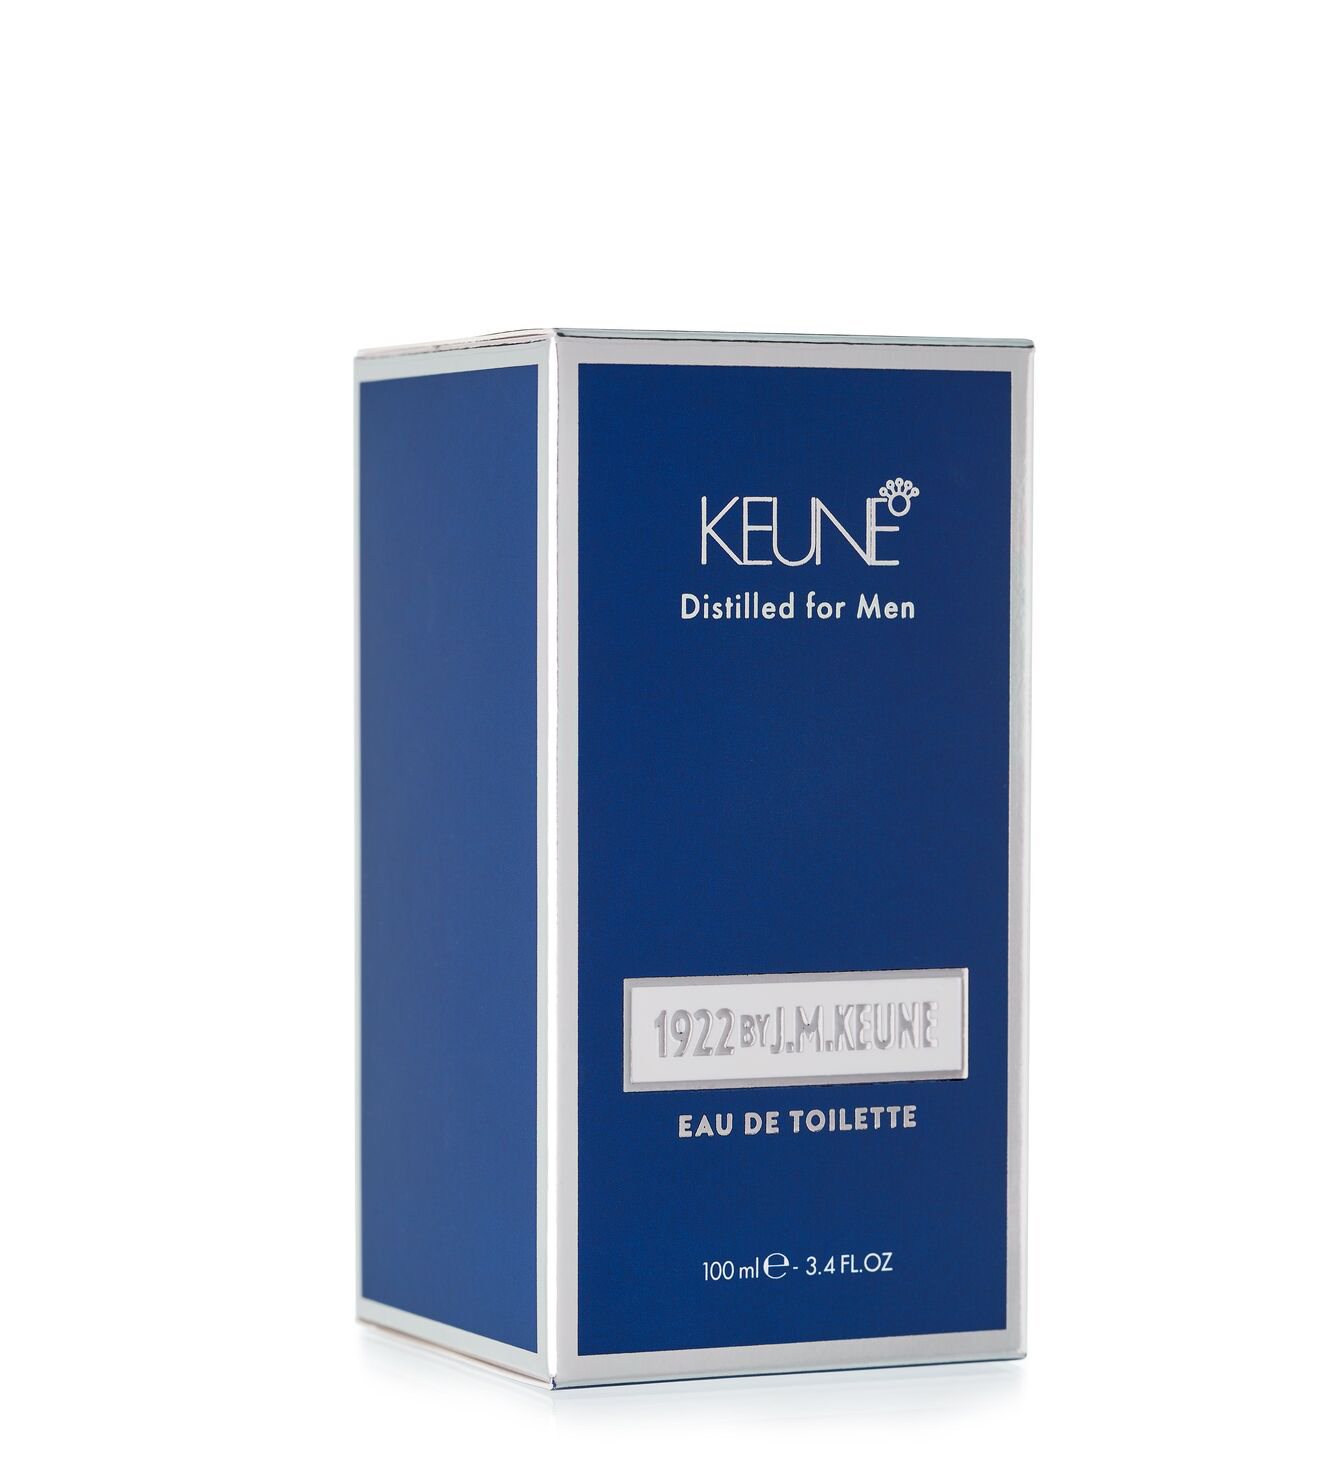 1922 Eau de Toilette: A masculine scent for the contemporary gentleman. The perfect complement to 1922 by J.M. Keune products. Available in a 100ml glass bottle - perfume for men.